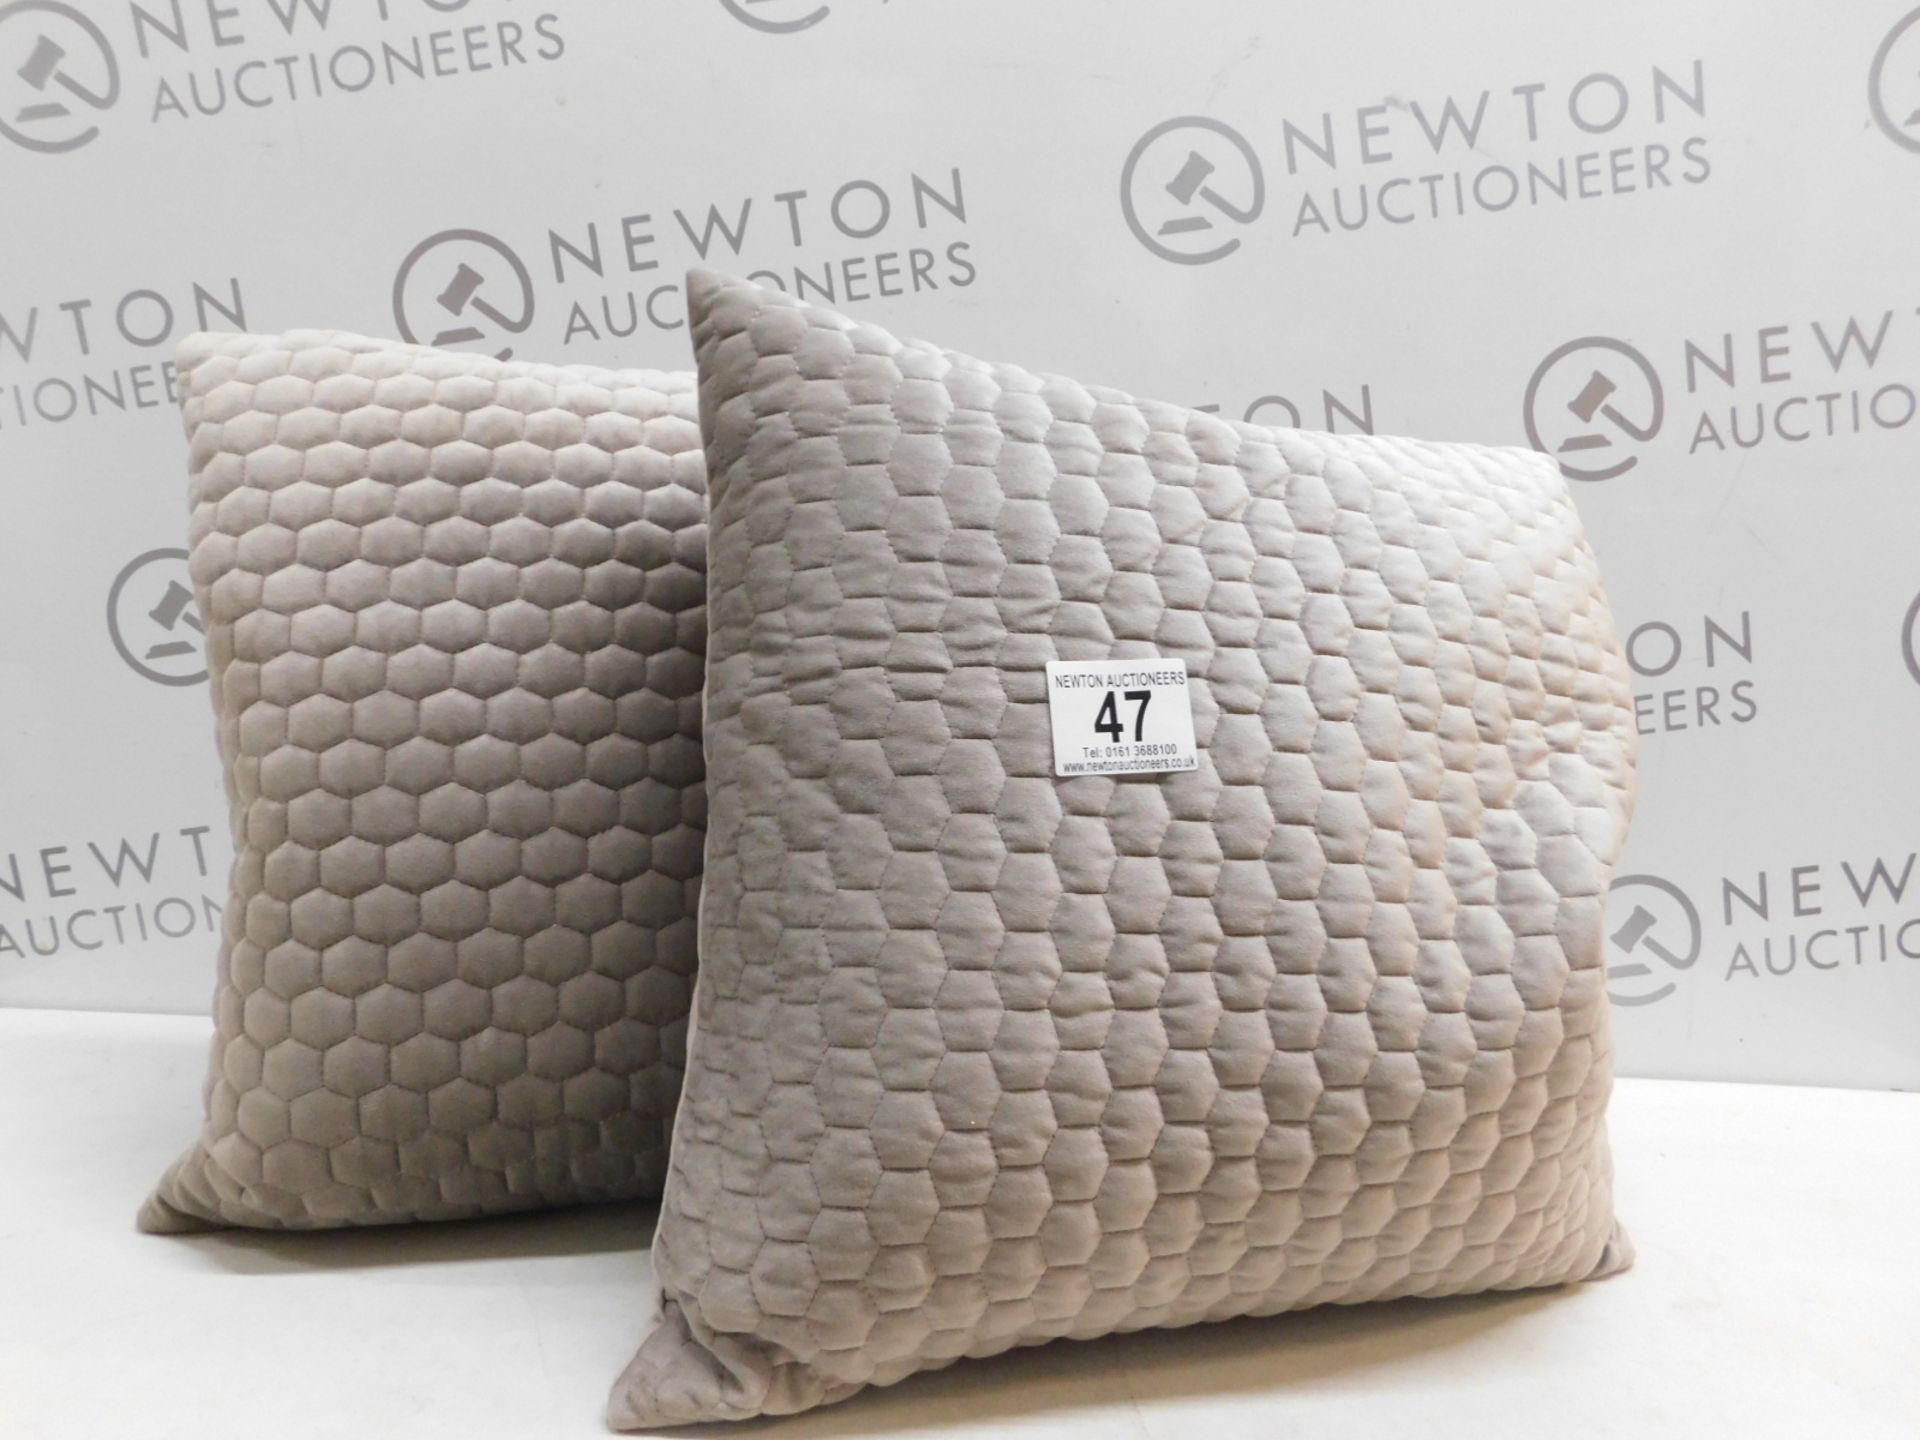 1 PAIR OF GALLERY DIRECT HONEYCOMB GREY CUSHION RRP Â£34.99